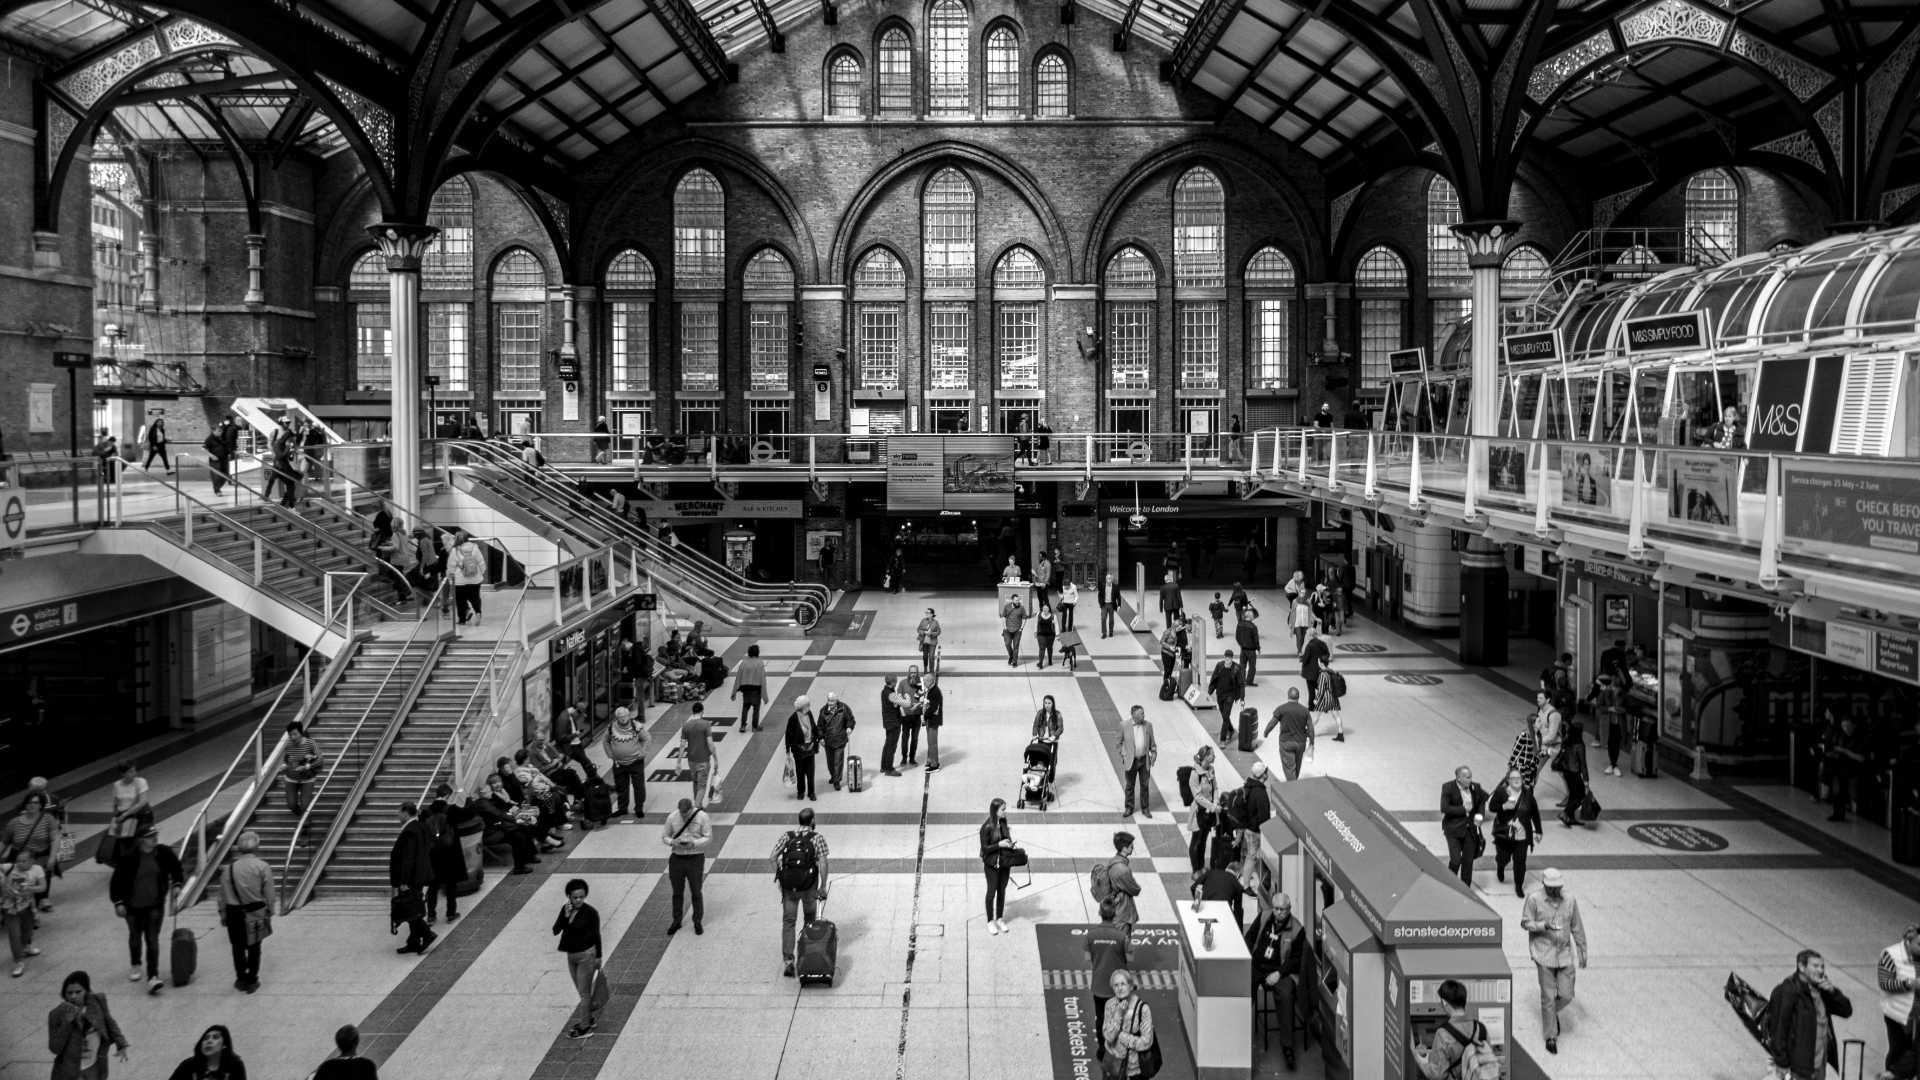 "Liverpool Street Station - London" by Steven Penton, used under CC BY 2.0 / Cropped, desaturated and resampled from original